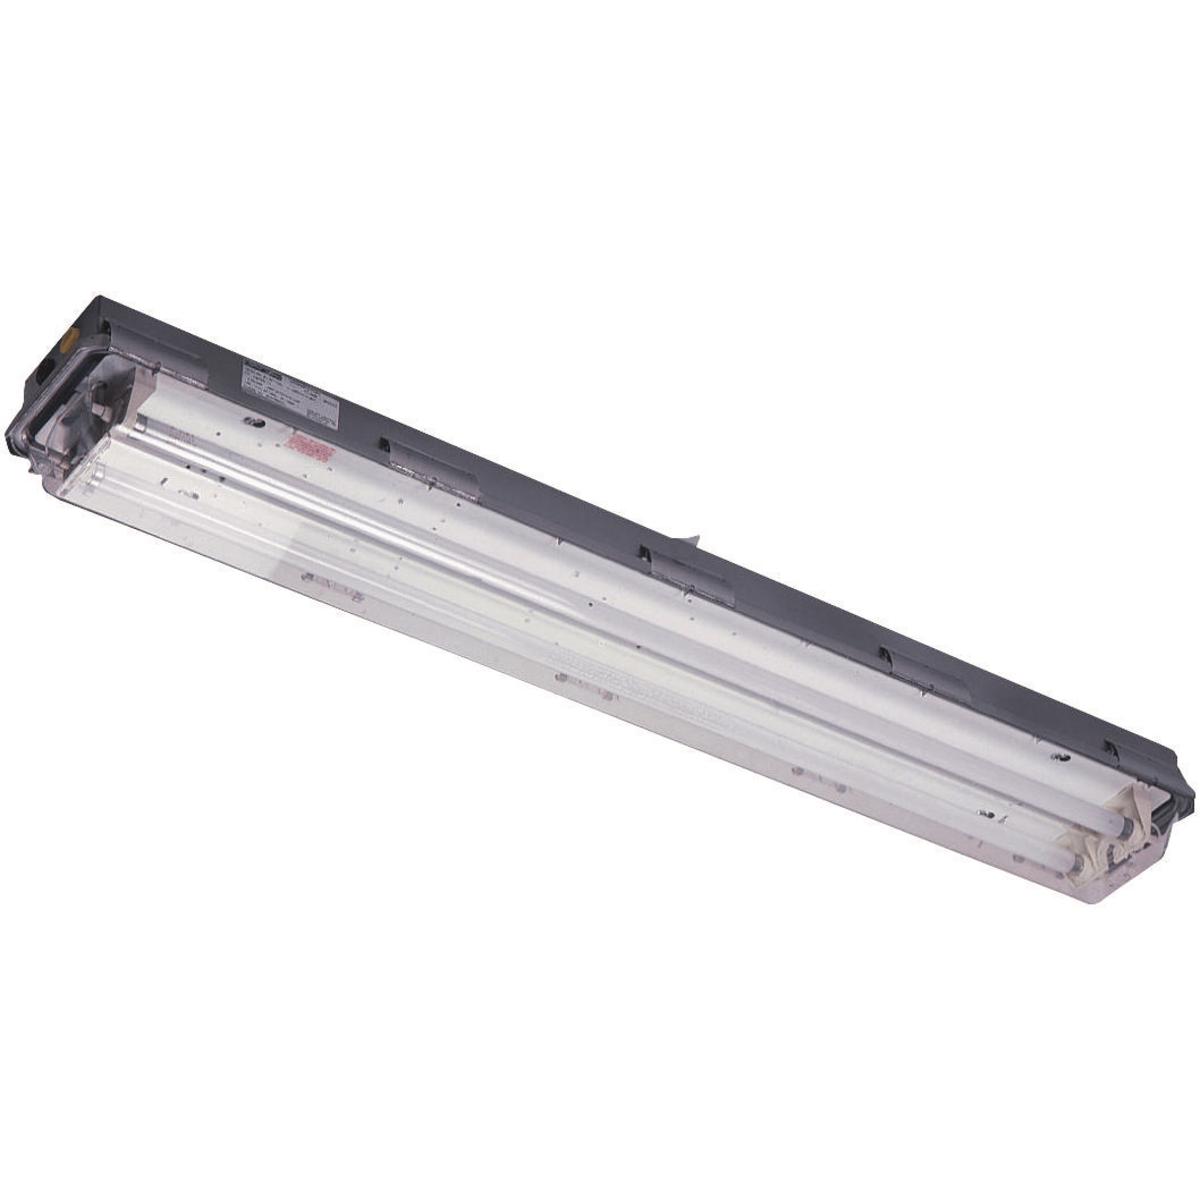 Hubbell LZ2SE2-32215 LZ2SE Series- Stainless Steel- Emergency- 32W 347V - 4'  2-Lamp T-8 Electronic 50/60 Hz 0°F Start Medium Bi-Pin  ; NEMA 4 & IP66 rated enclosure ; Housing-one piece fiberglass reinforced polyester or 316 Stainless Steel ; Clear Lexan® impact resistant pol